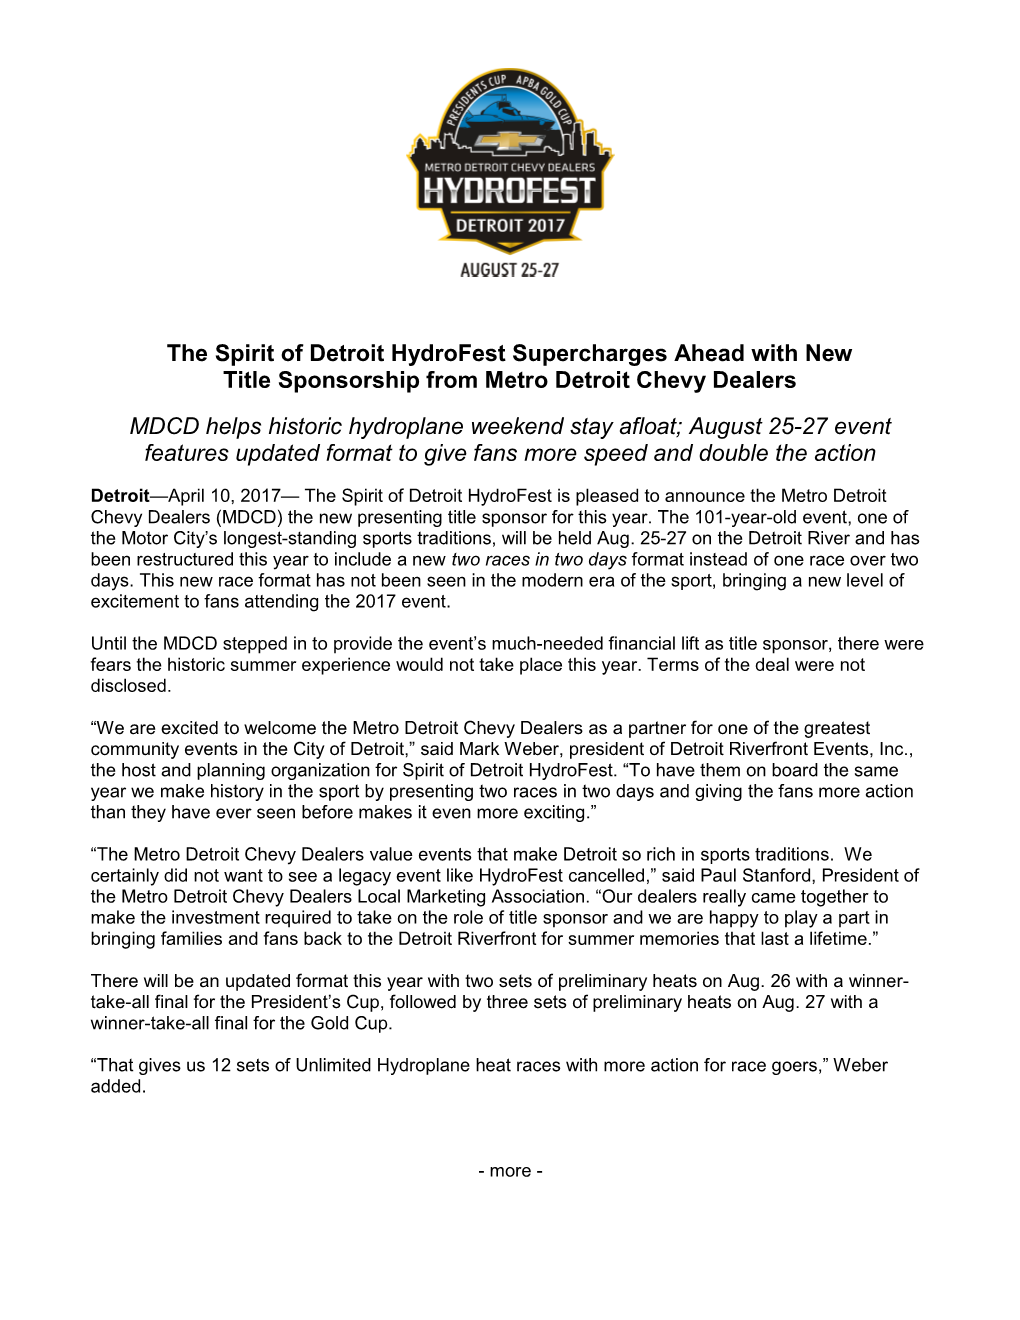 The Spirit of Detroit Hydrofest Supercharges Ahead with New Title Sponsorship from Metro Detroit Chevy Dealers